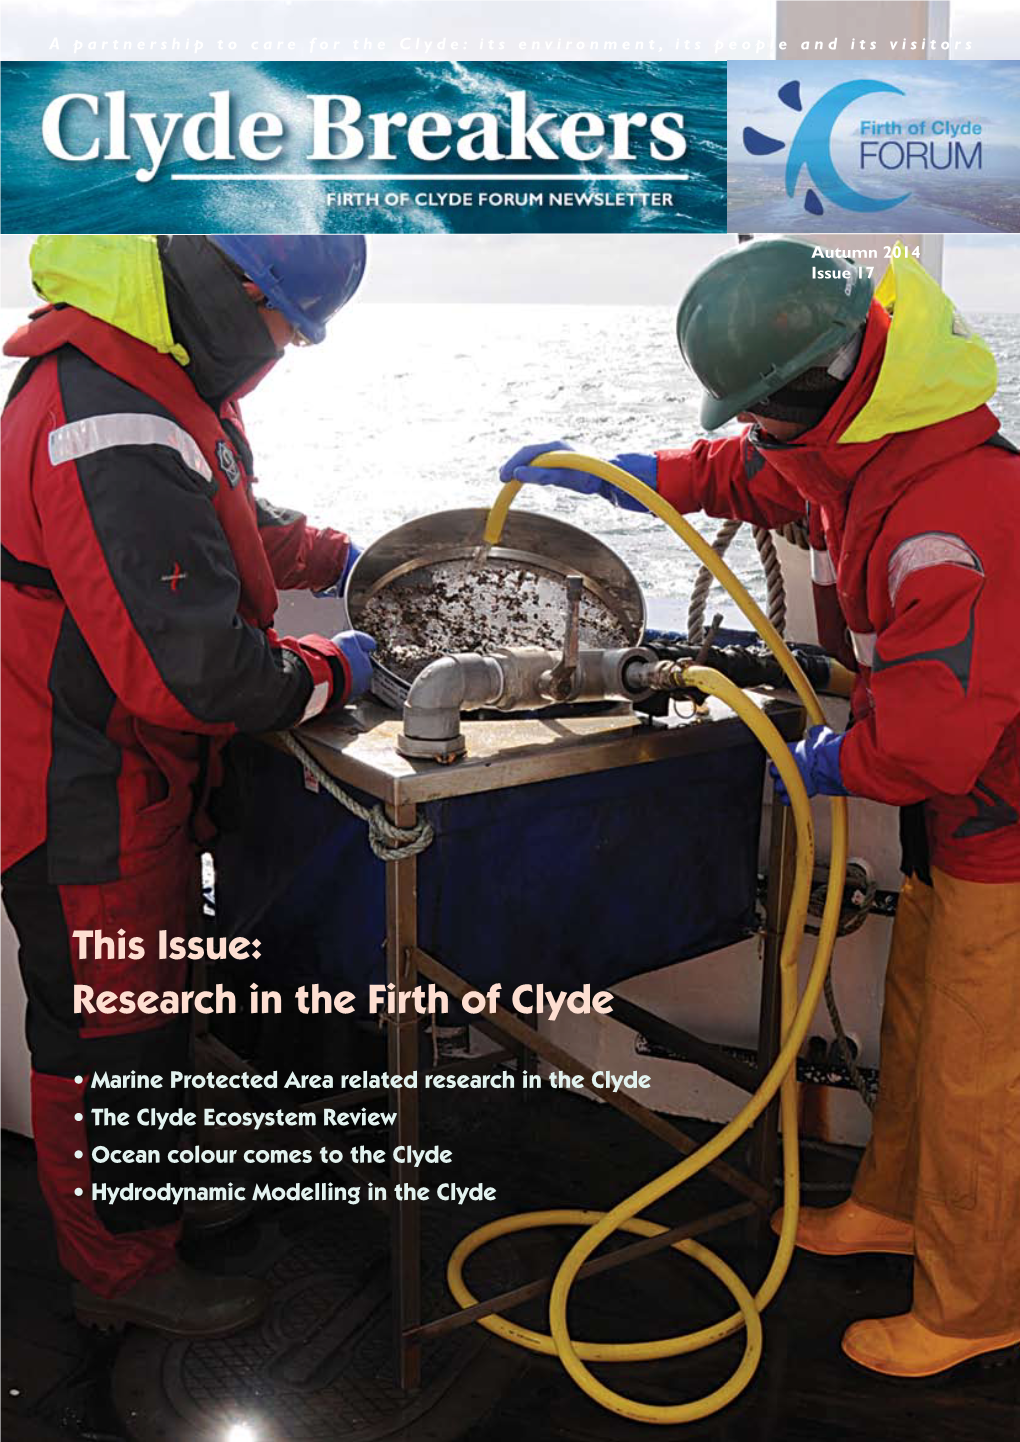 This Issue: Research in the Firth of Clyde